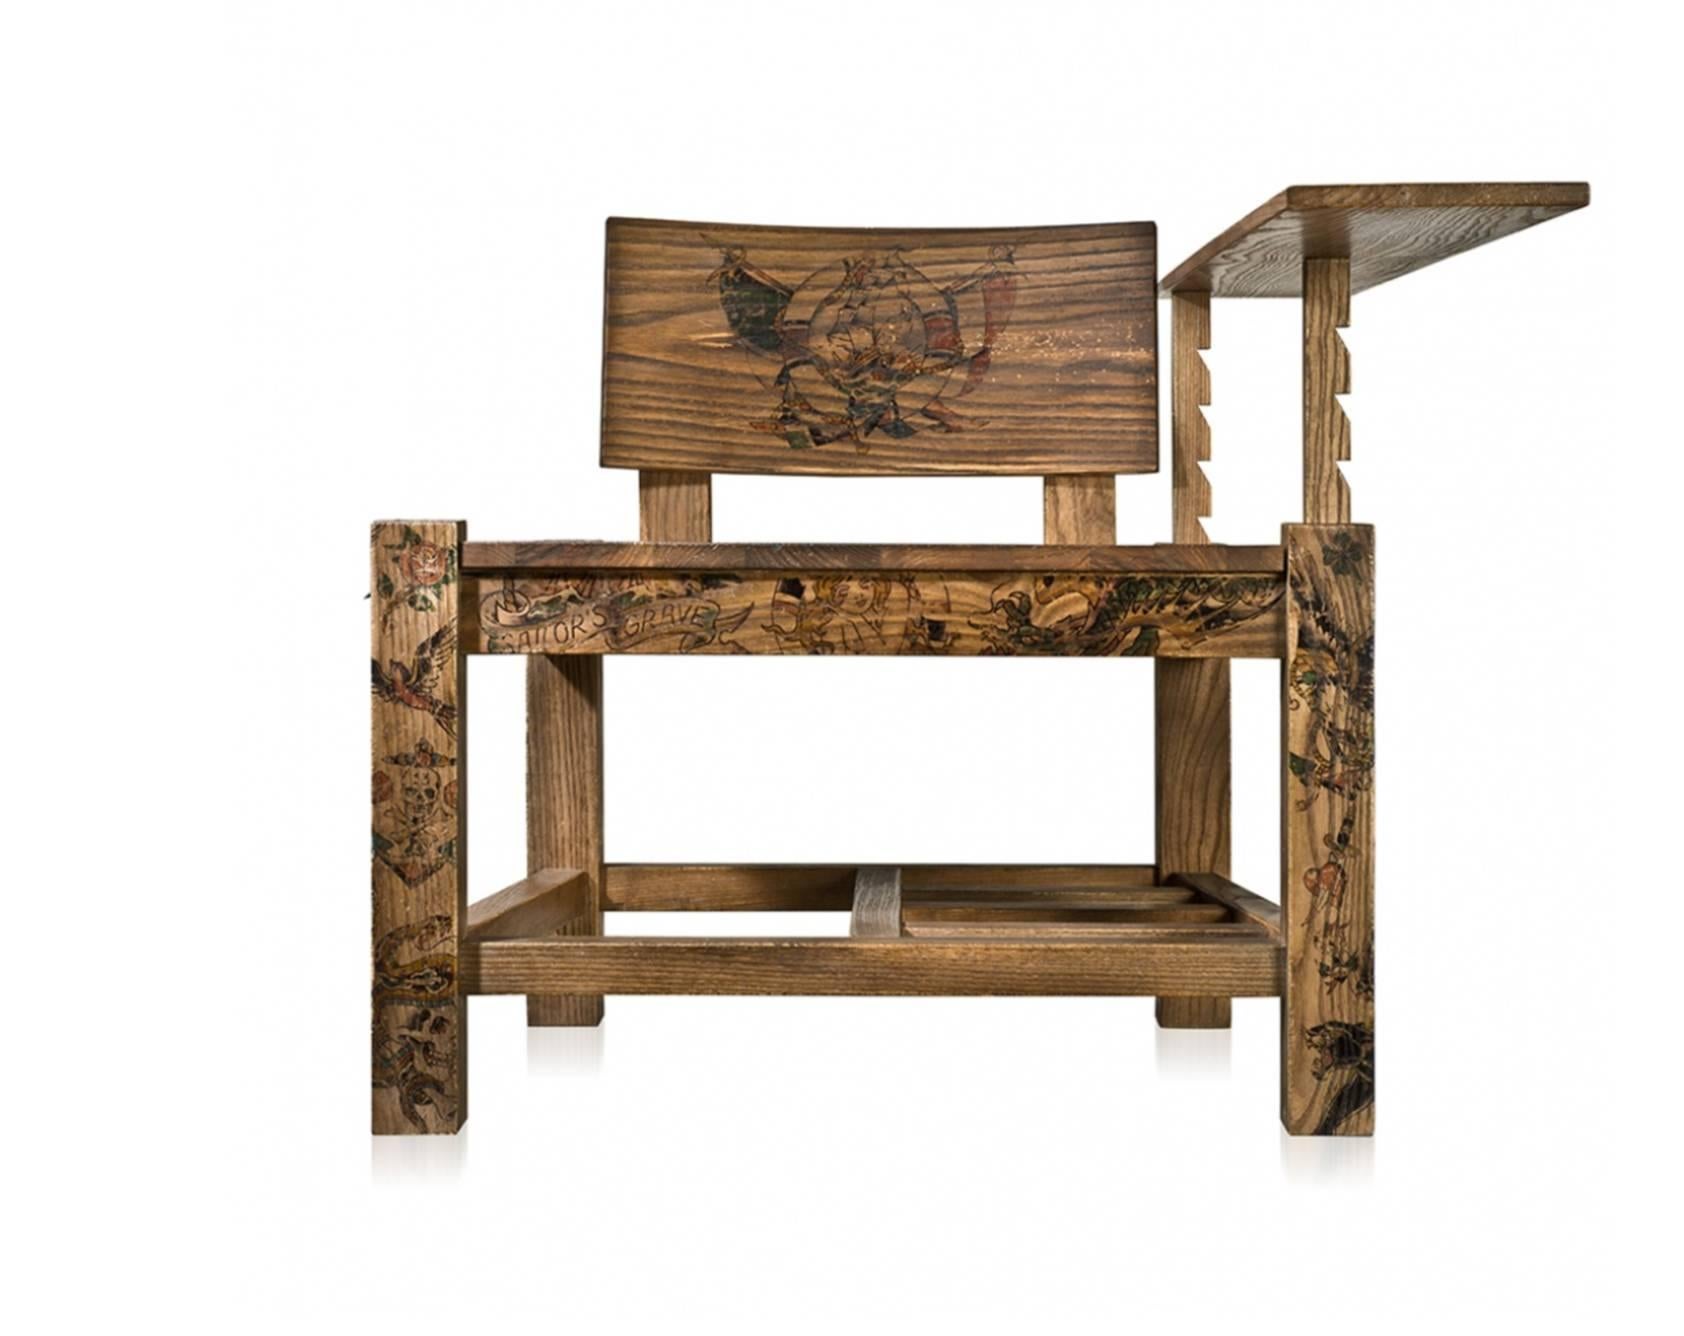 Built with a wide range of adjustable and detachable parts; this allows this chair to be versatile in functionality and aesthetics.

Each piece is built using solid-ash for it’s naturally detailed wood grain and solidity. 

The American tattoo